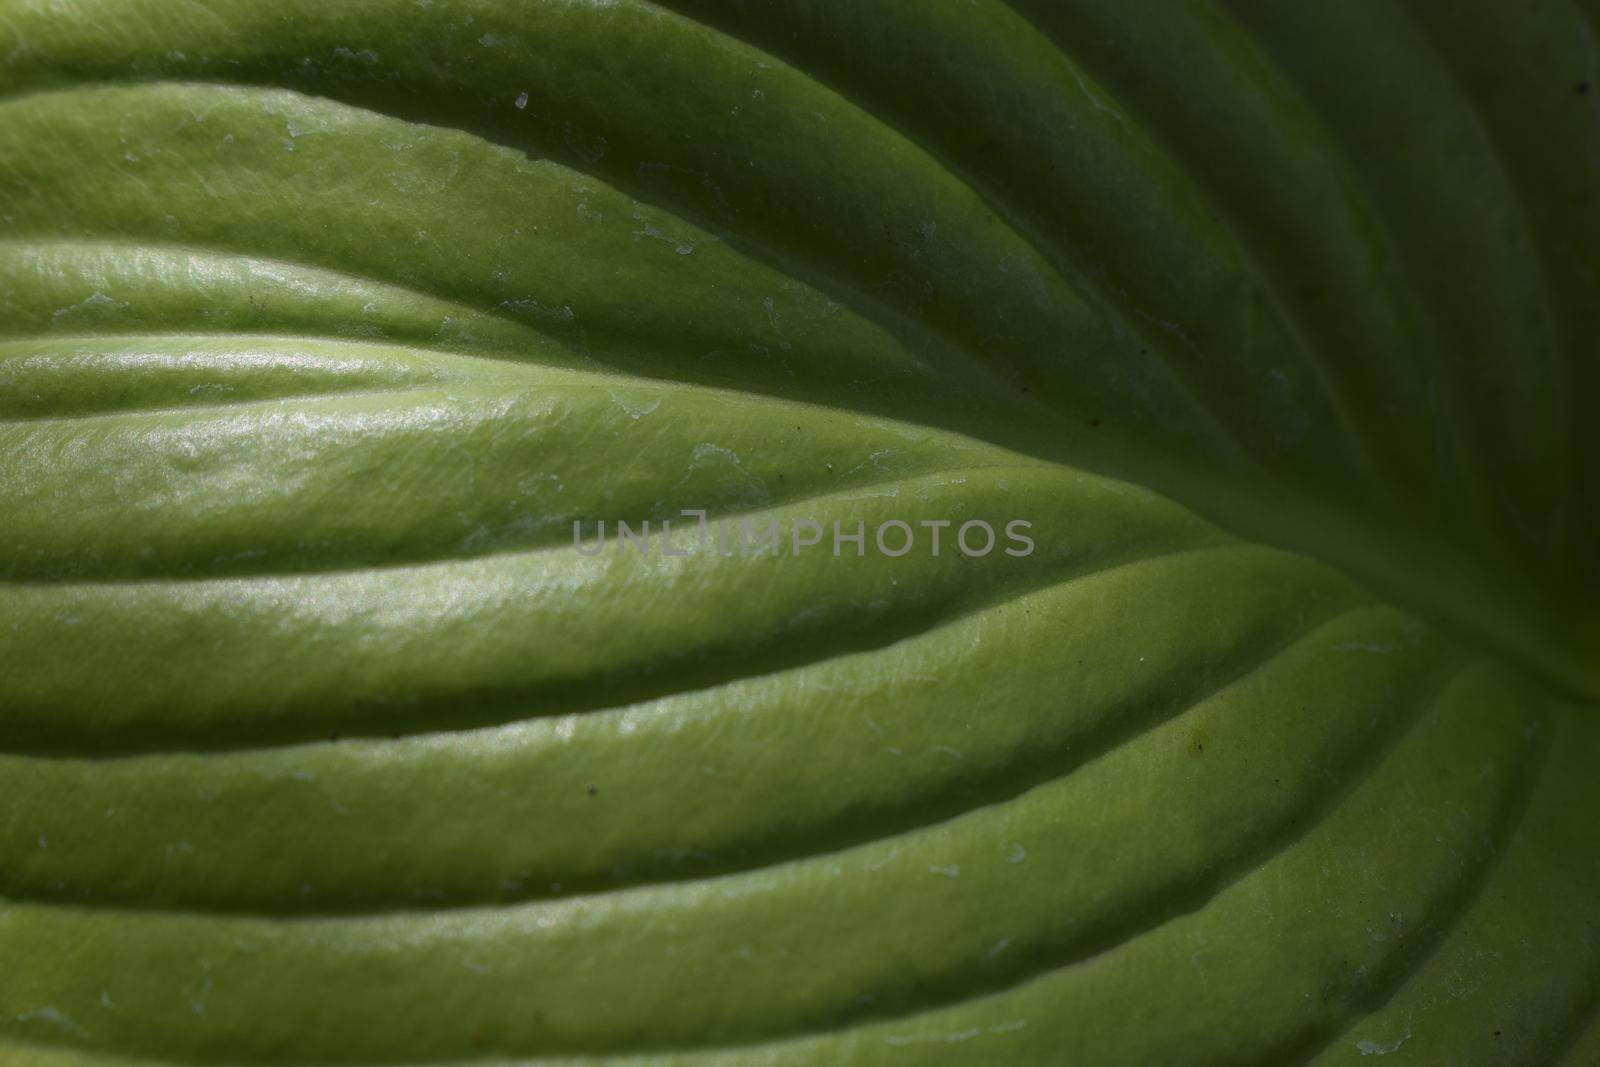 Hosta plant in the garden. Closeup green leaves background. Hosta - an ornamental plant for landscaping park and garden design